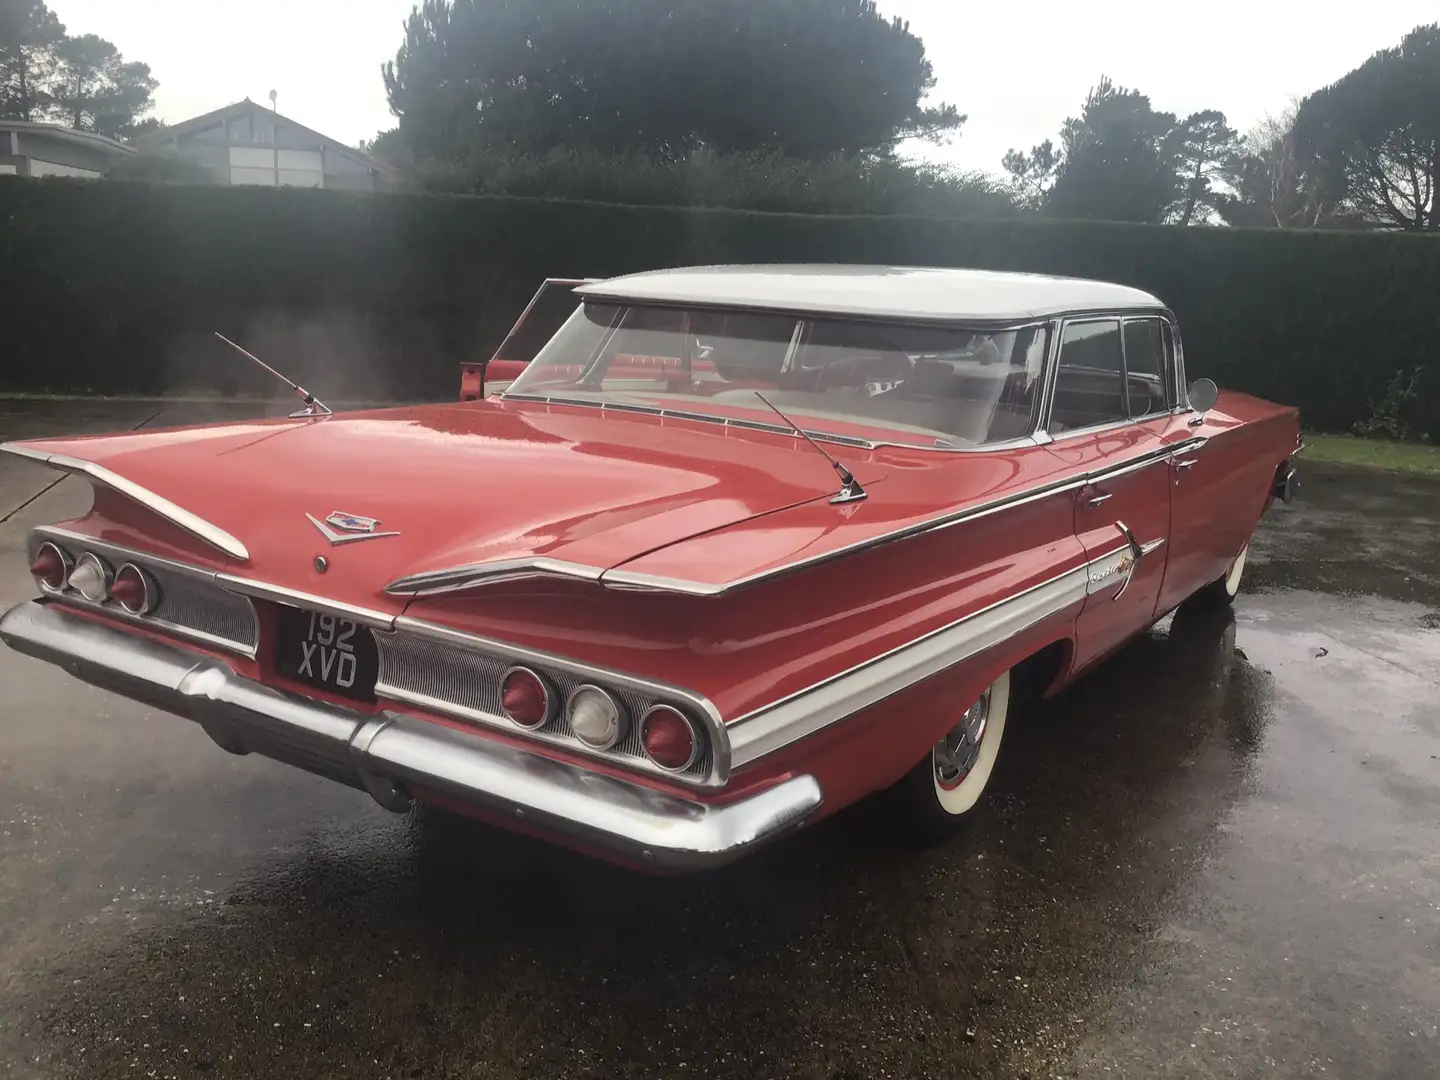 Chevrolet Impala automatic, power steering, working aircon, superb Rosso - 1